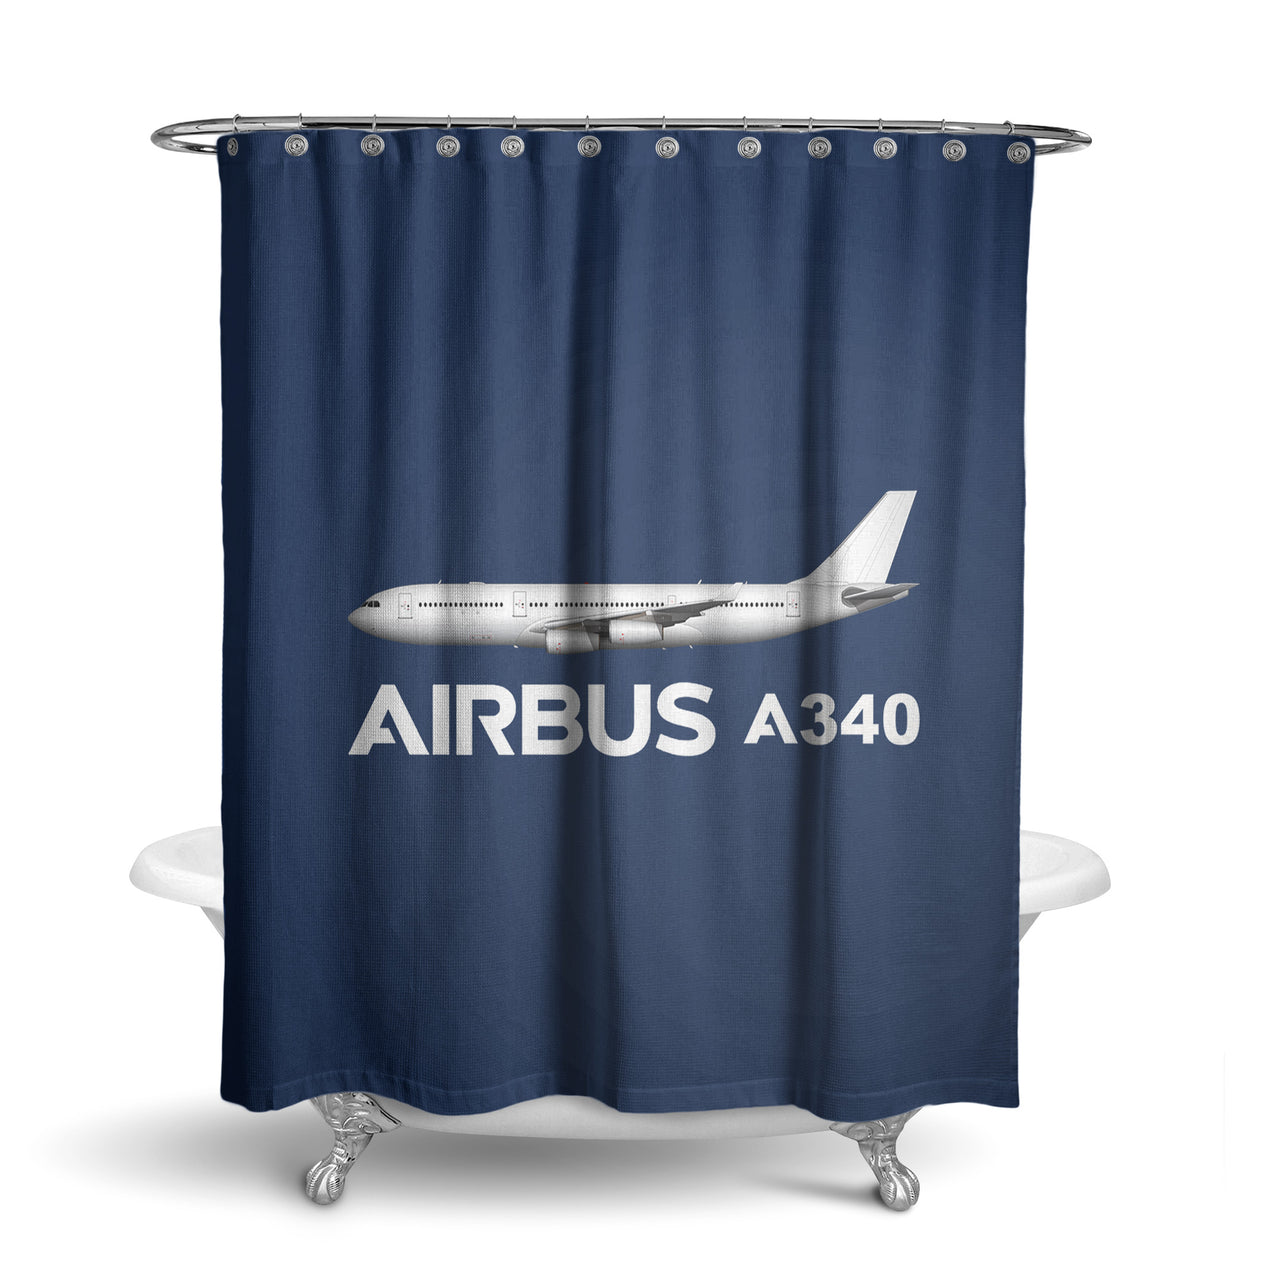 The Airbus A340 Designed Shower Curtains